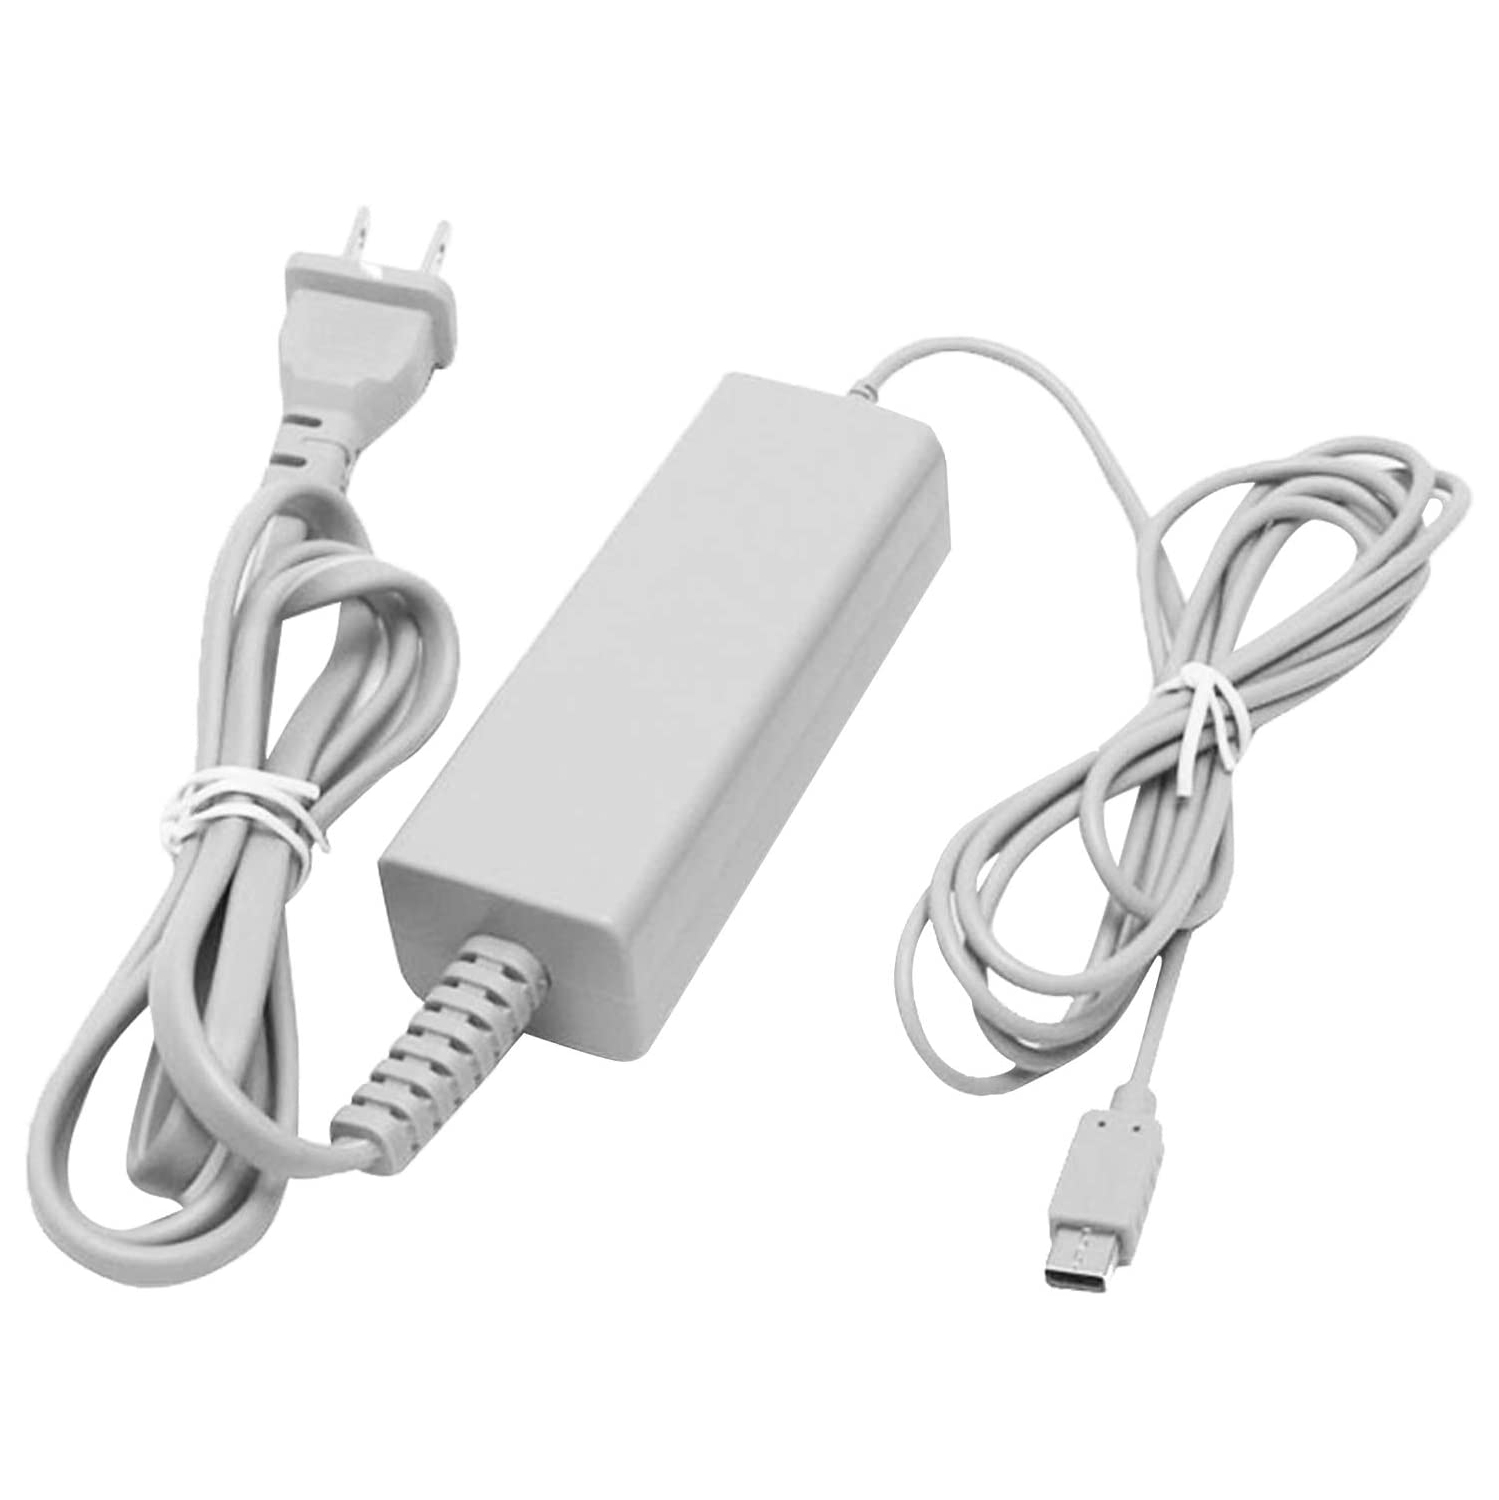 Charger for Wii U Gamepad , AC Power Adapter Supply Charger Cable Cord for Nintendo Wii U Gamepad Remote Controller